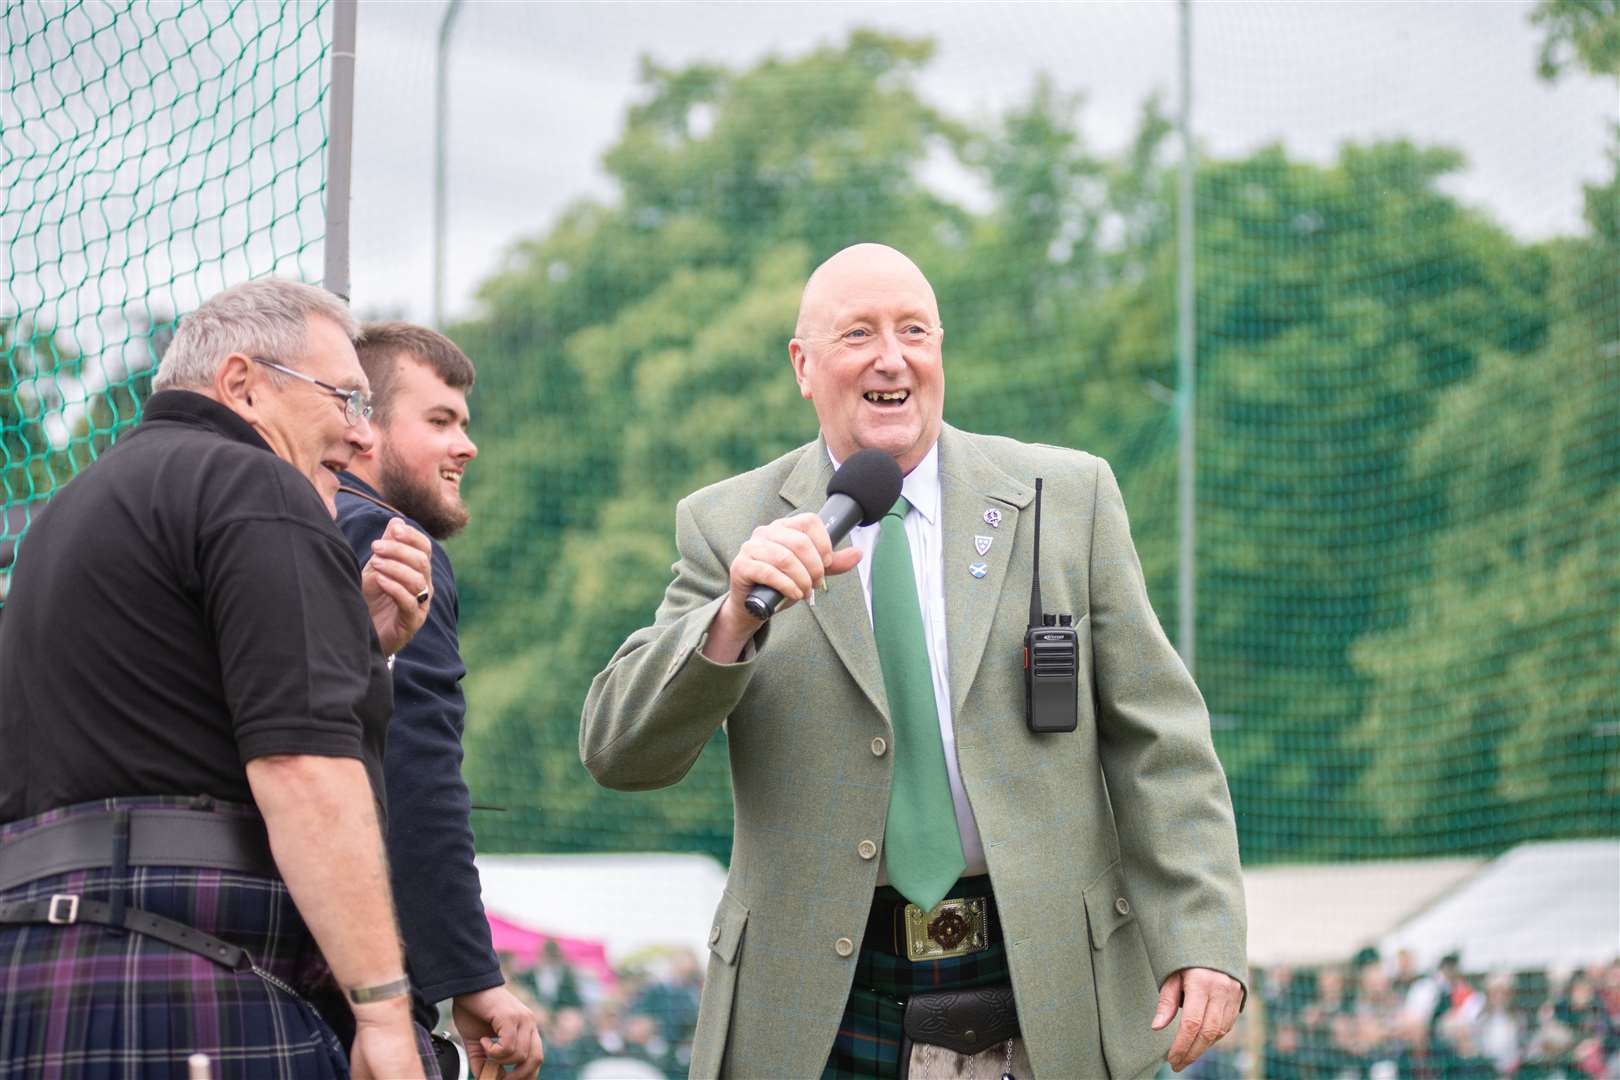 Event mate Paul Jamieson on the mic...77th Aberlour Strathspey Highland Games held on Saturday August 6, 2022...Pictured: Daniel Forsyth..